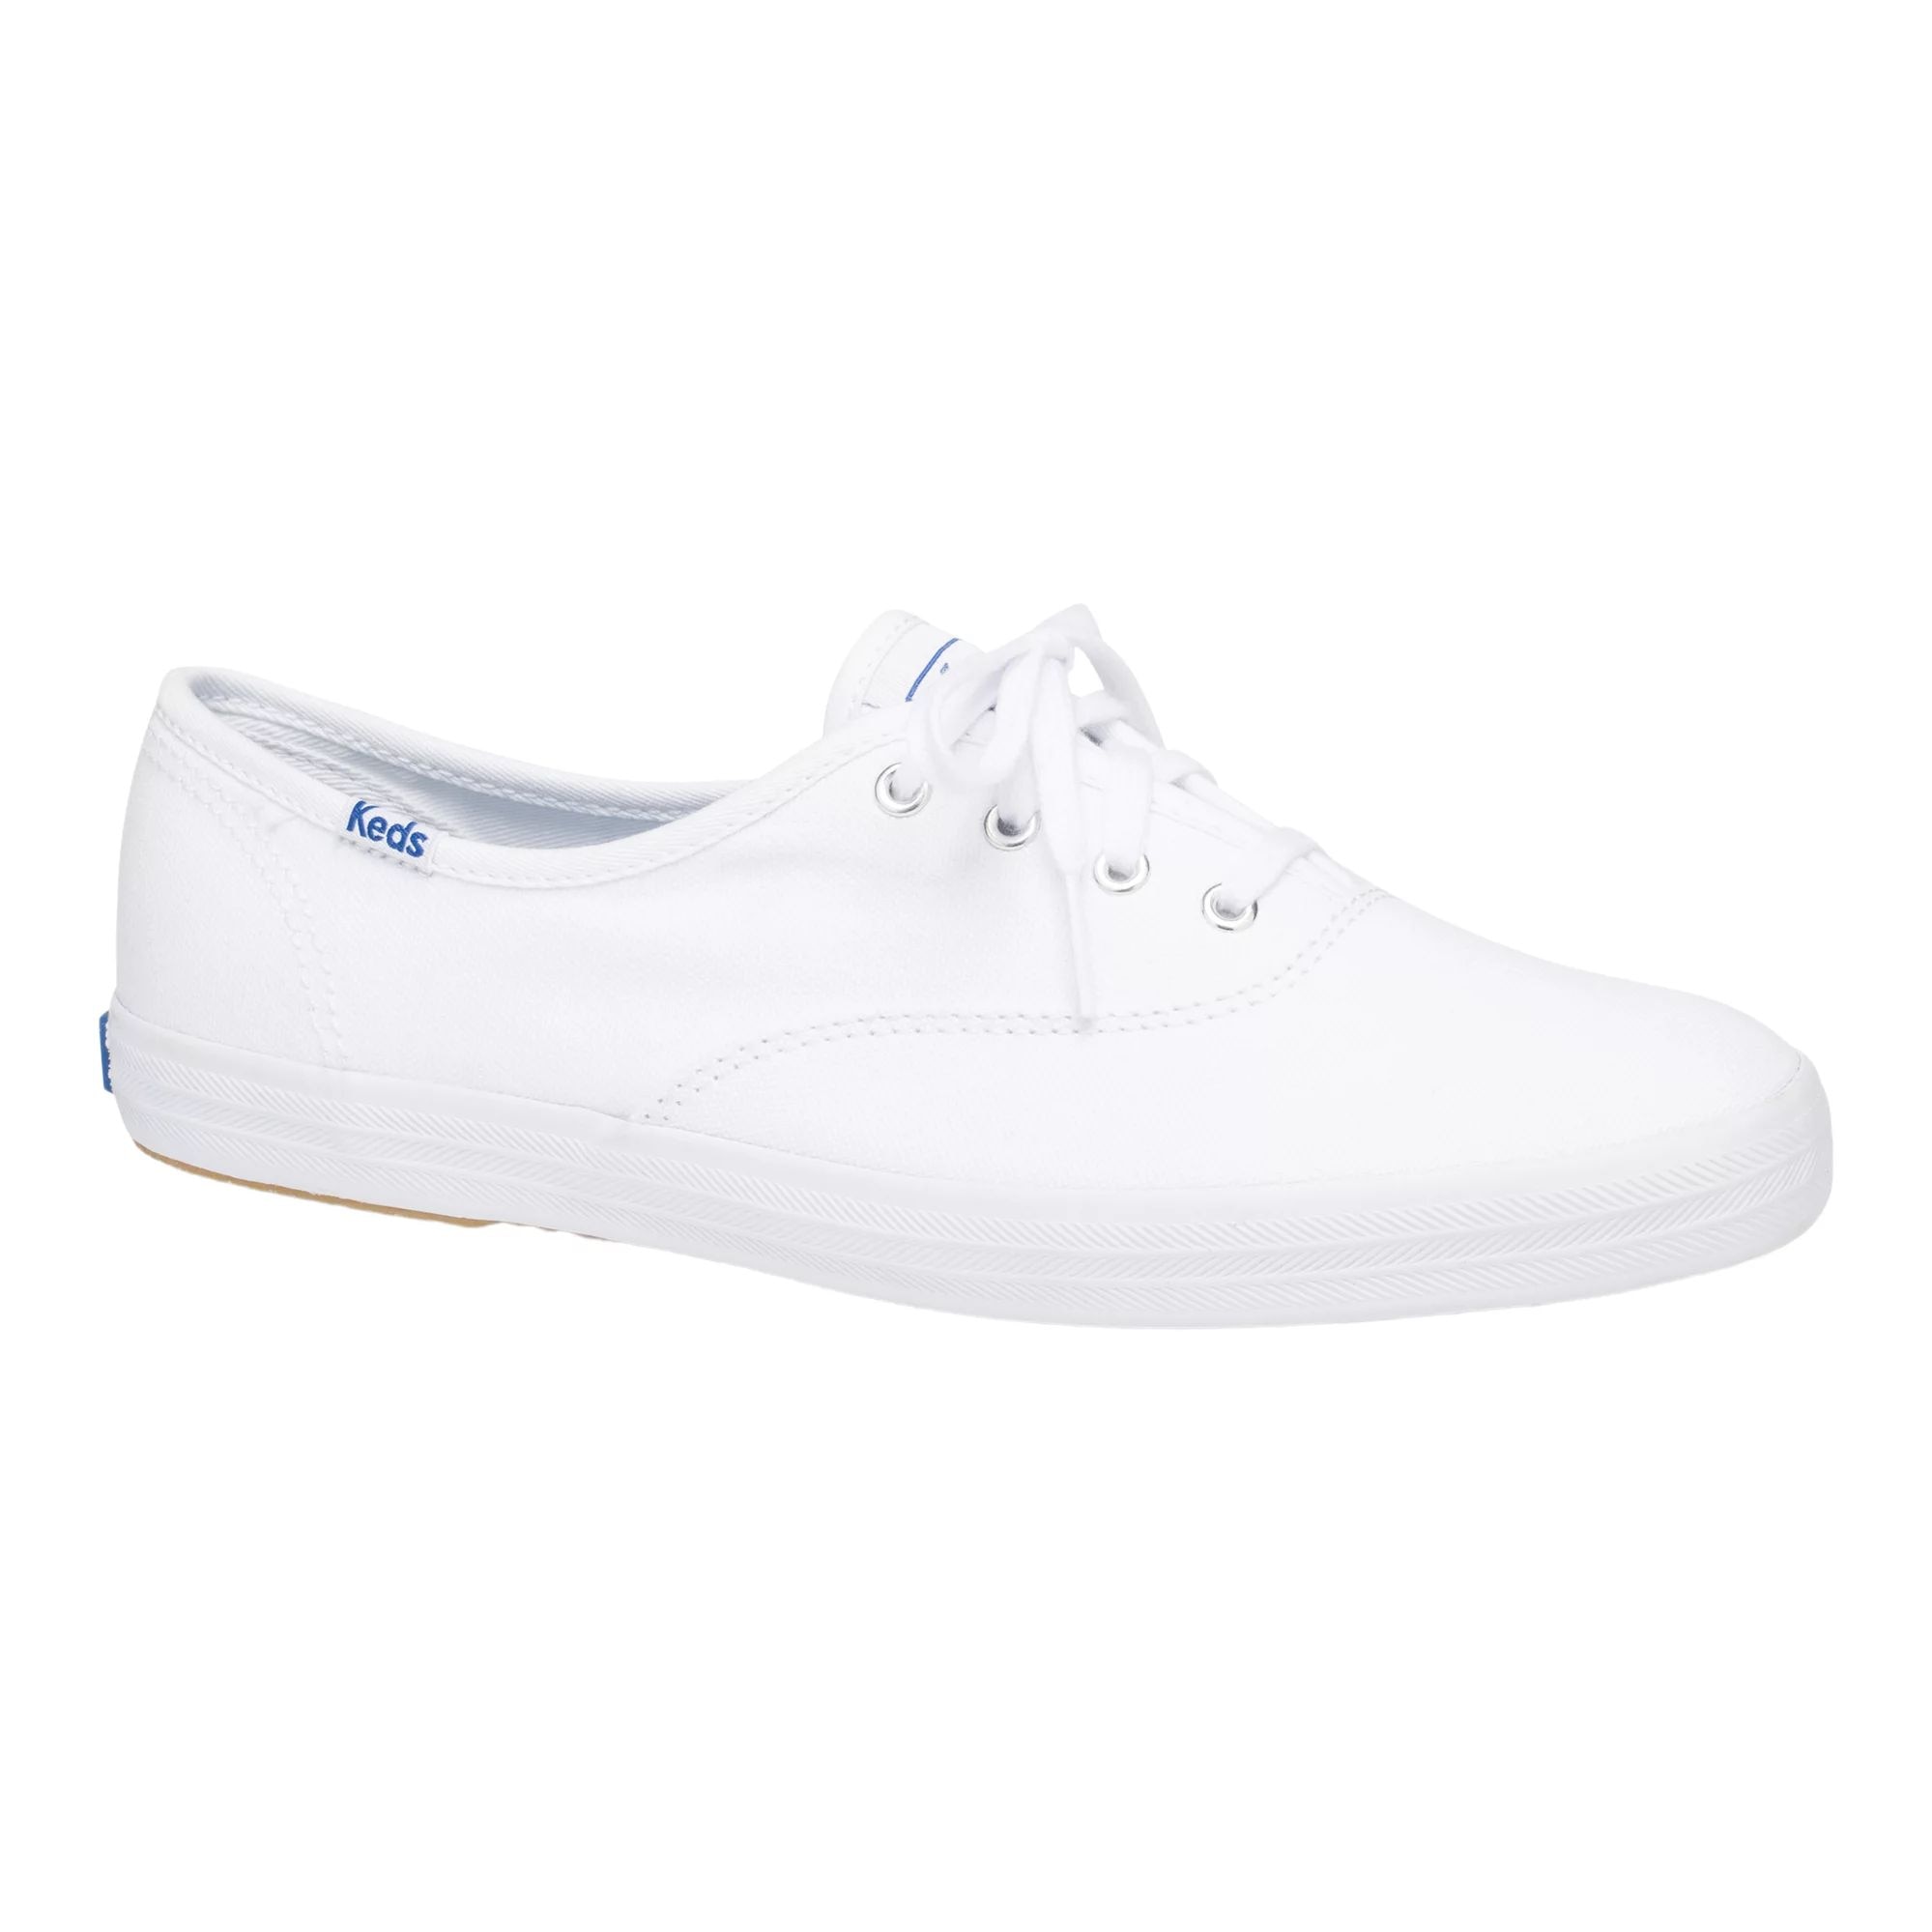 Image of Keds Women's Champion Shoes Sneakers Casual